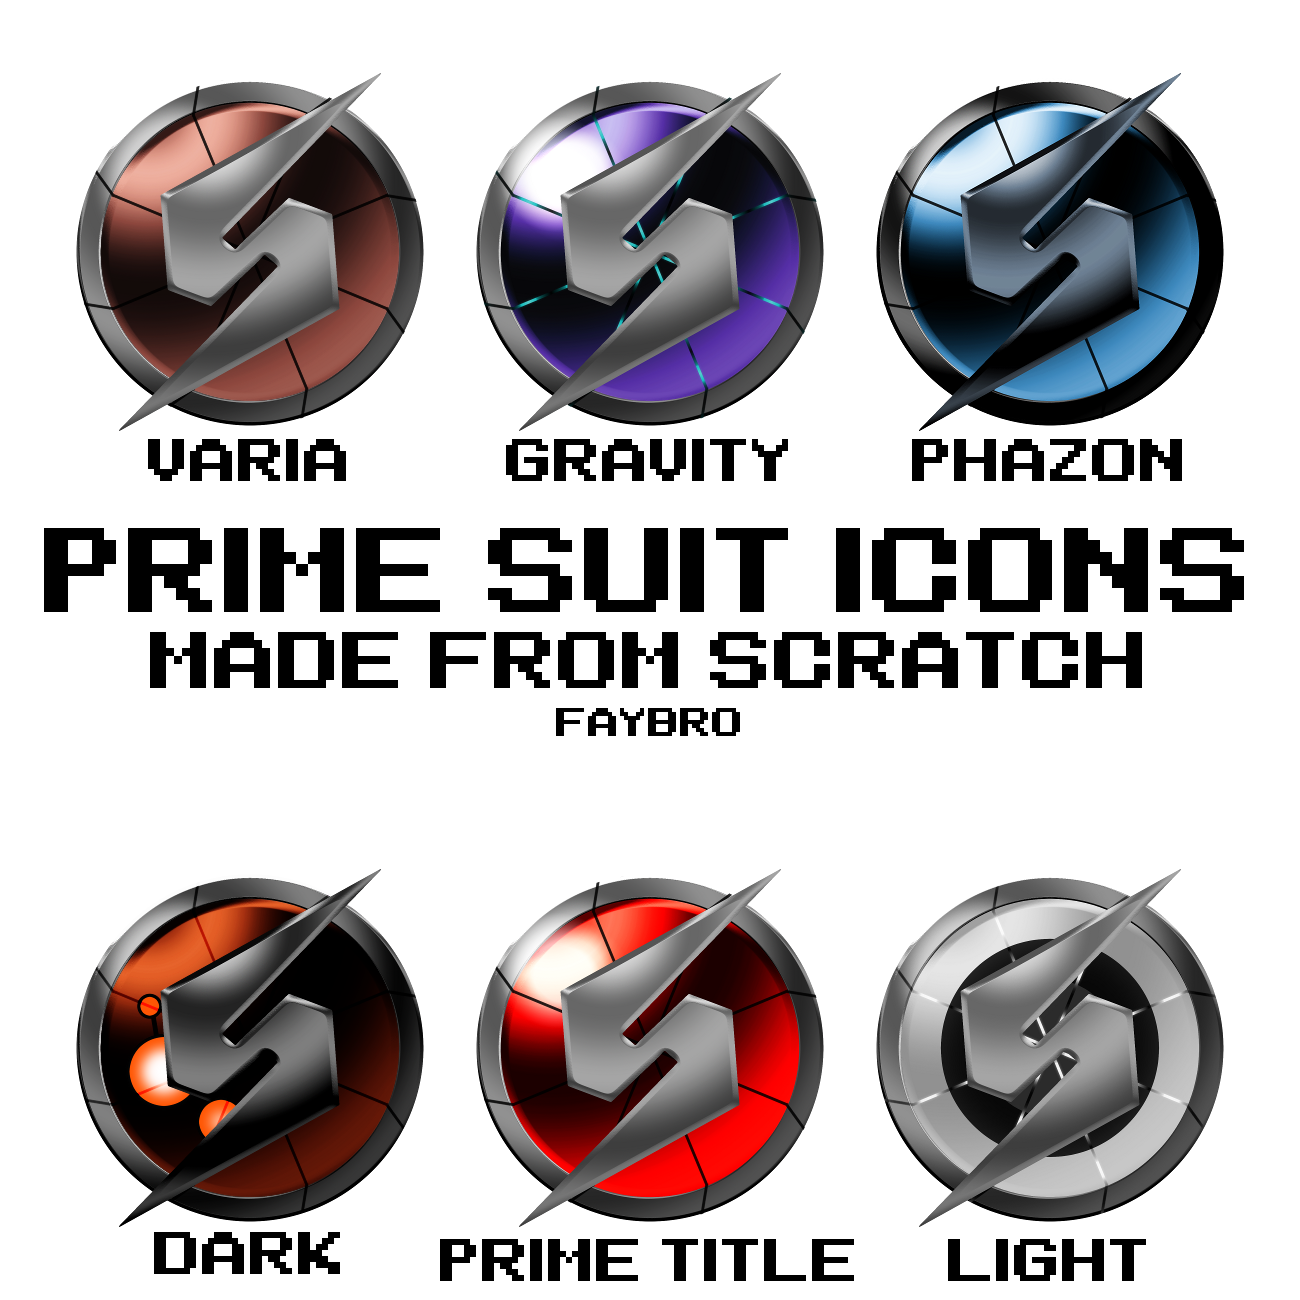 metroid_prime_suit_icons_by_faybro.png